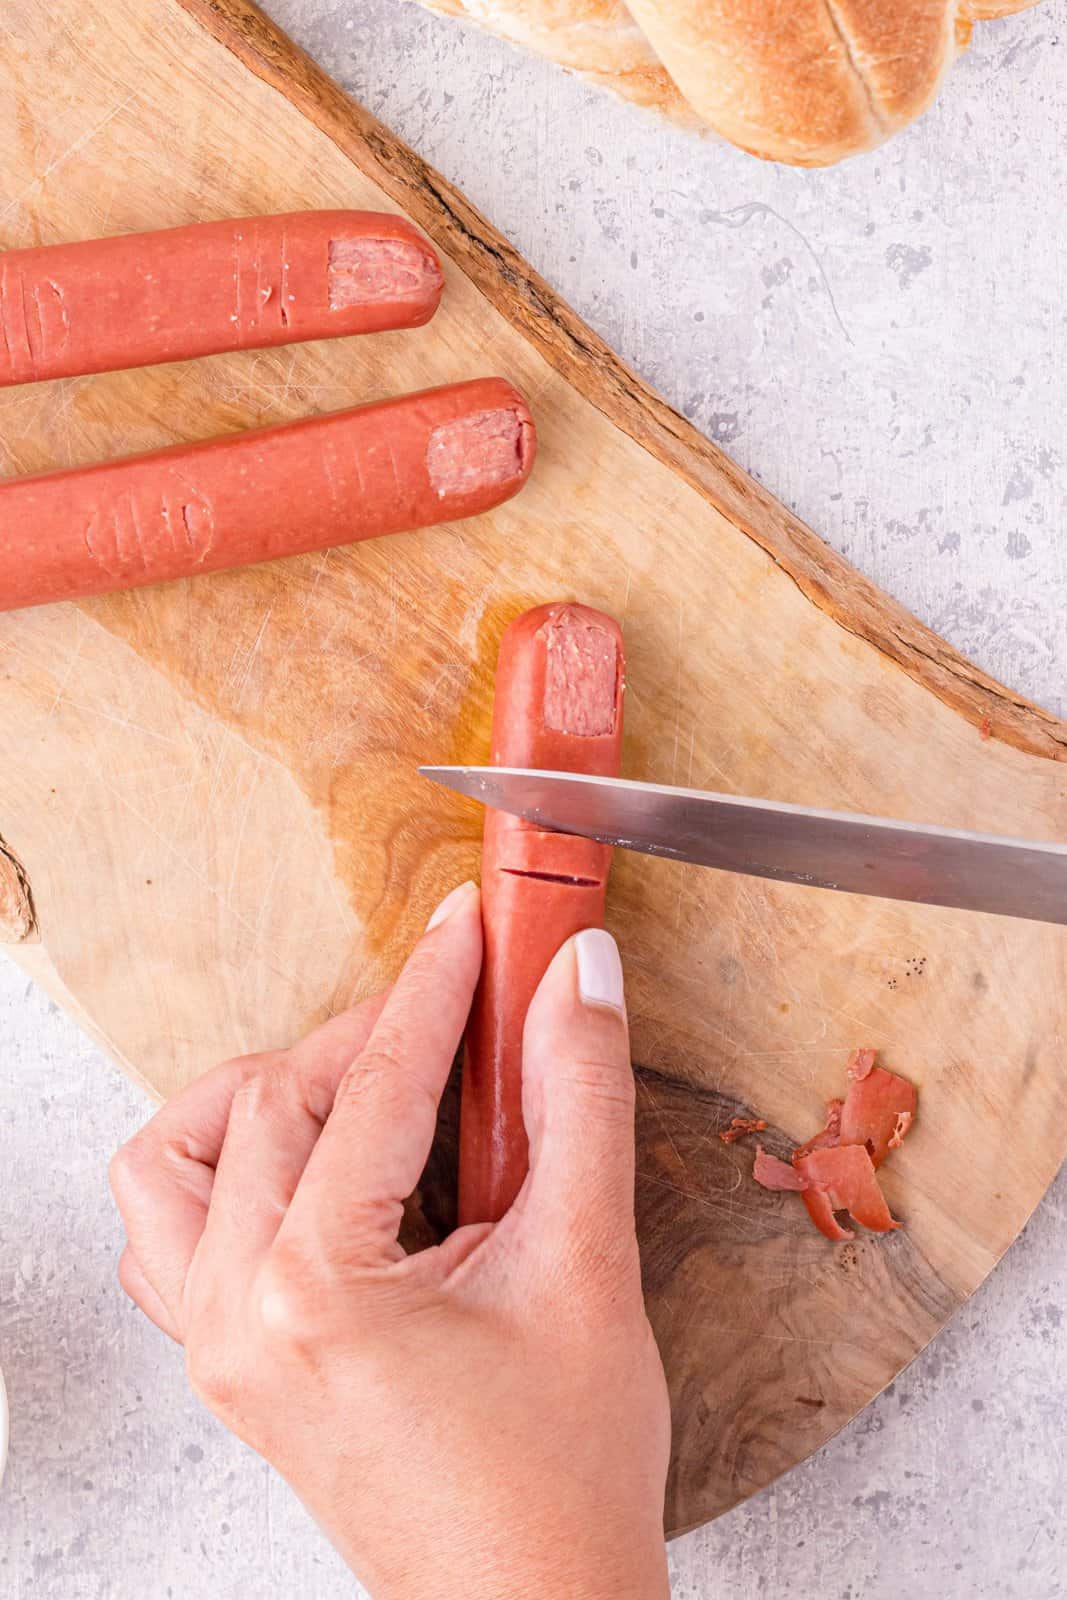 Knife cutting the upper knuckle creases in hot dog.